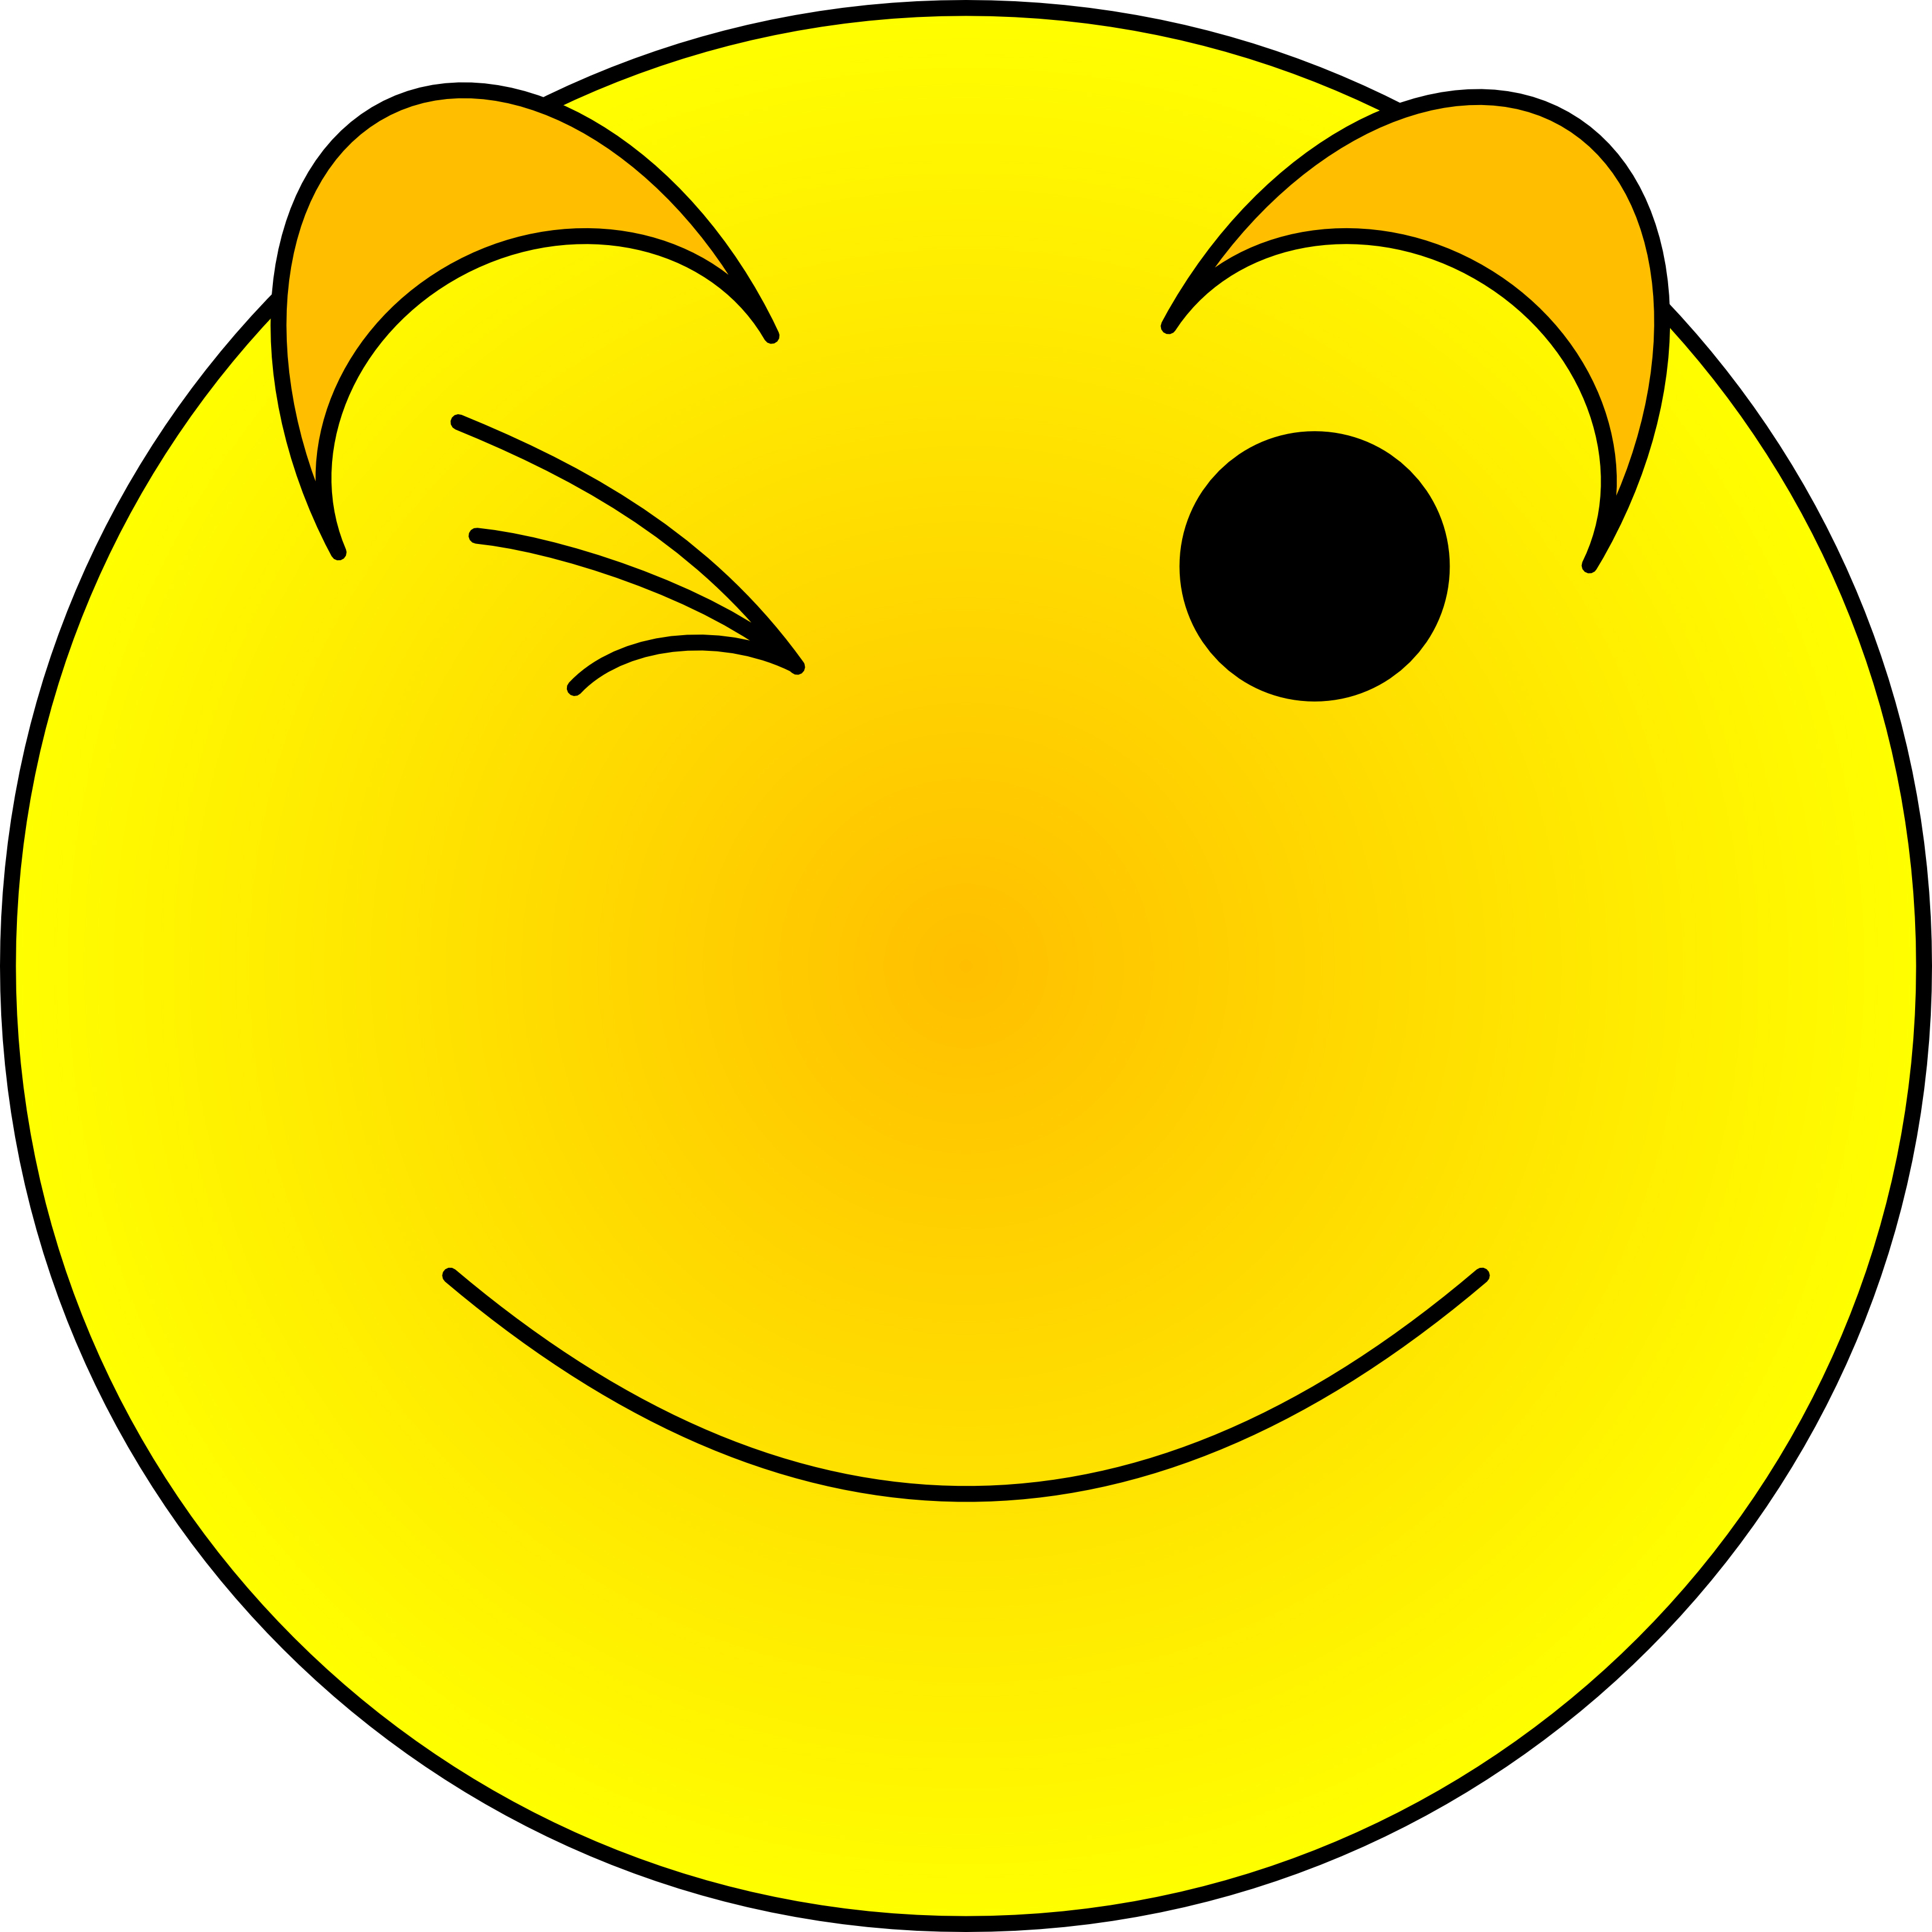 There Is 40 Crazy Smiley Face   Free Cliparts All Used For Free